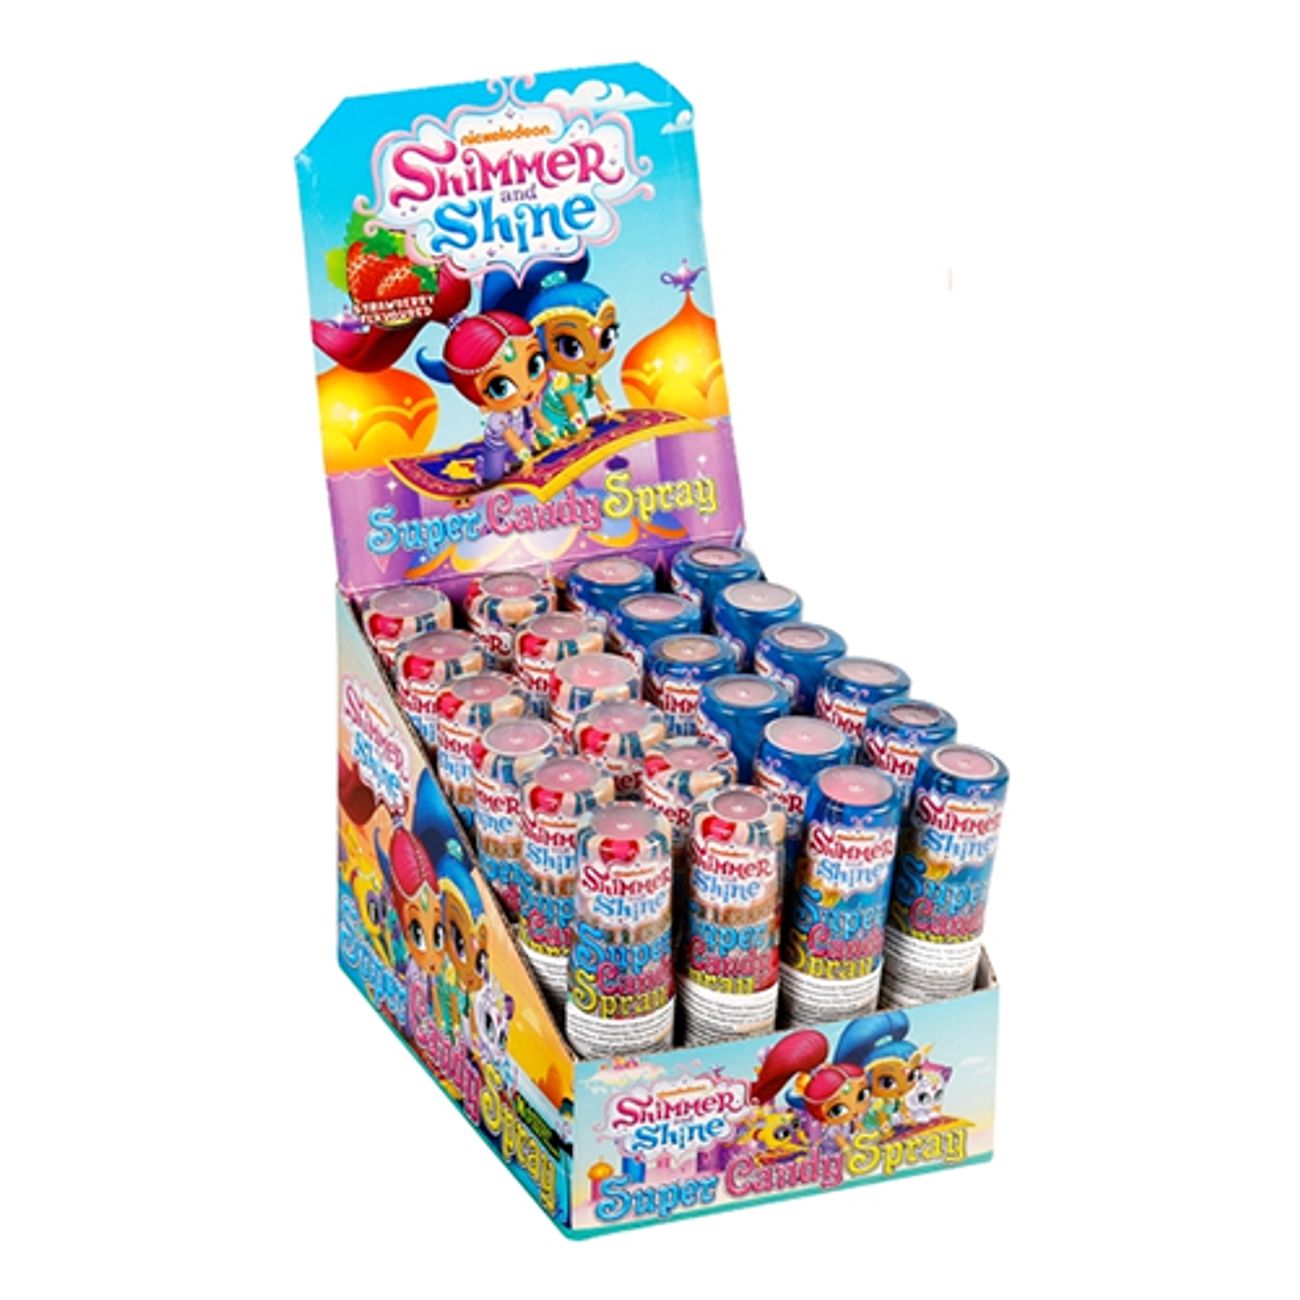 shimmer-and-shine-candy-spray-1